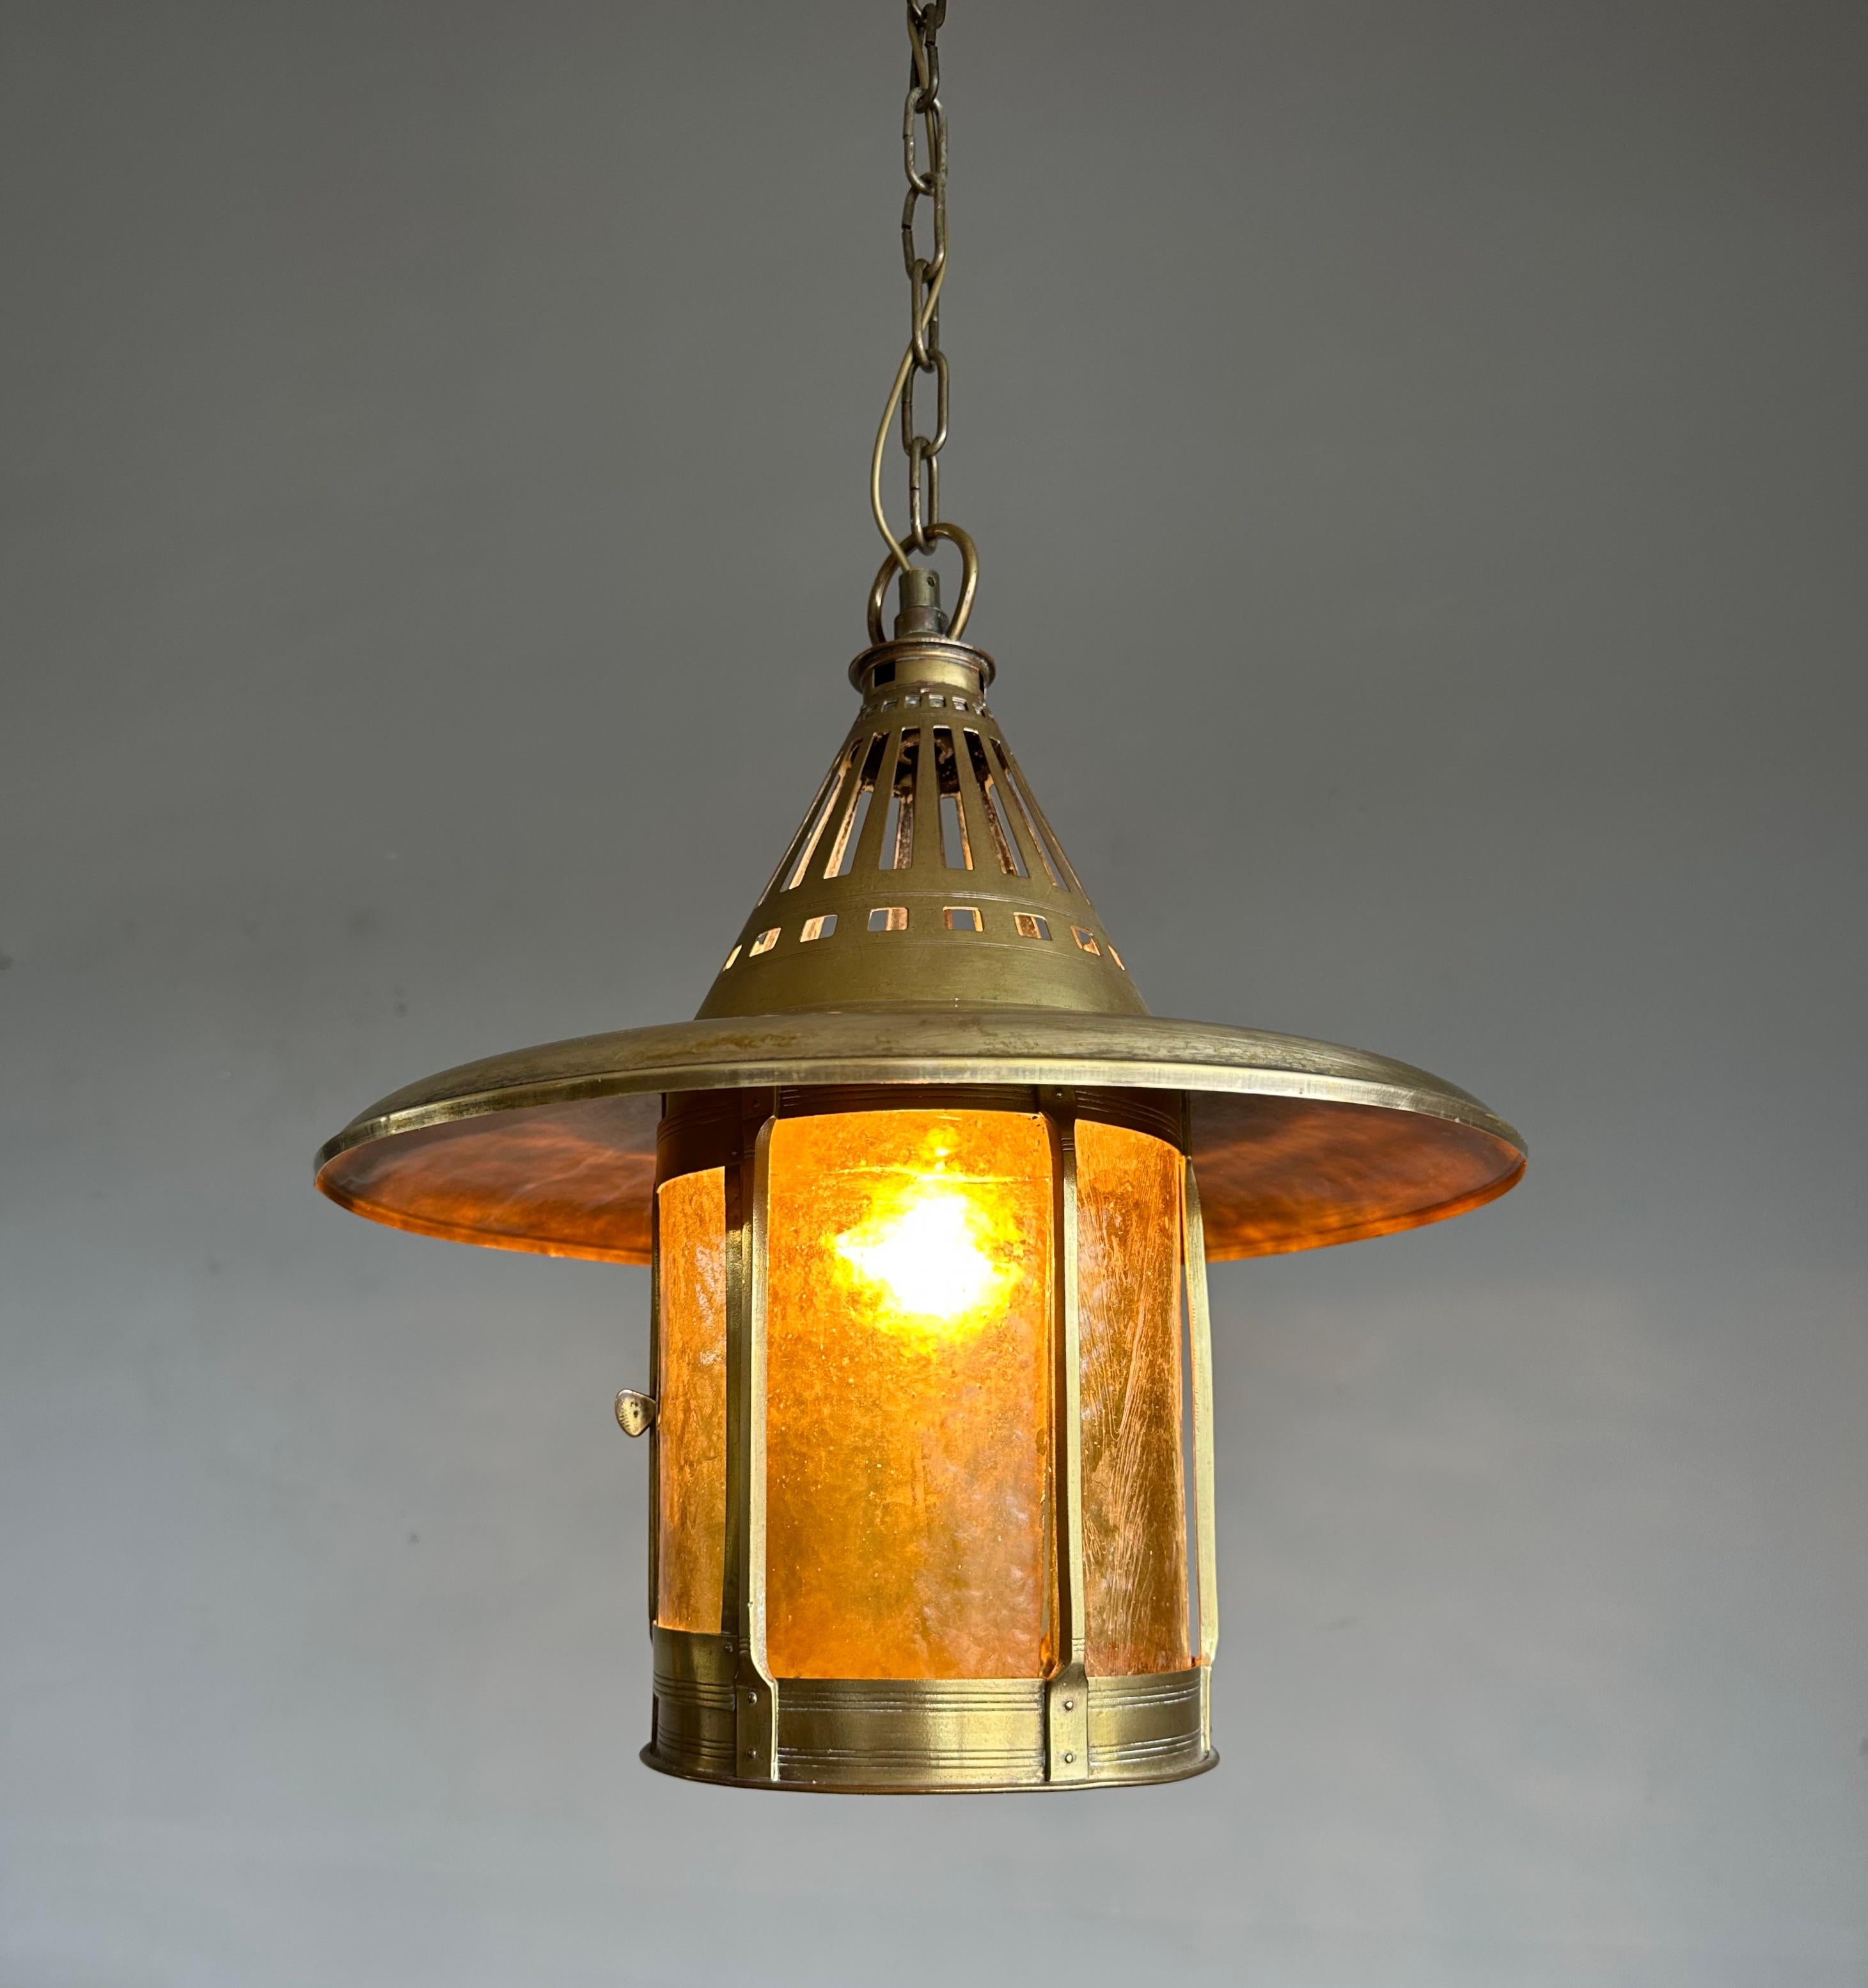 Rare and stylish and all-handcrafted Dutch Arts & Crafts entry hall pendant light / lantern.

If you are looking for the best and the rarest when it comes to European Arts and Crafts antiques then this extremely rare hallway or entry hall pendant